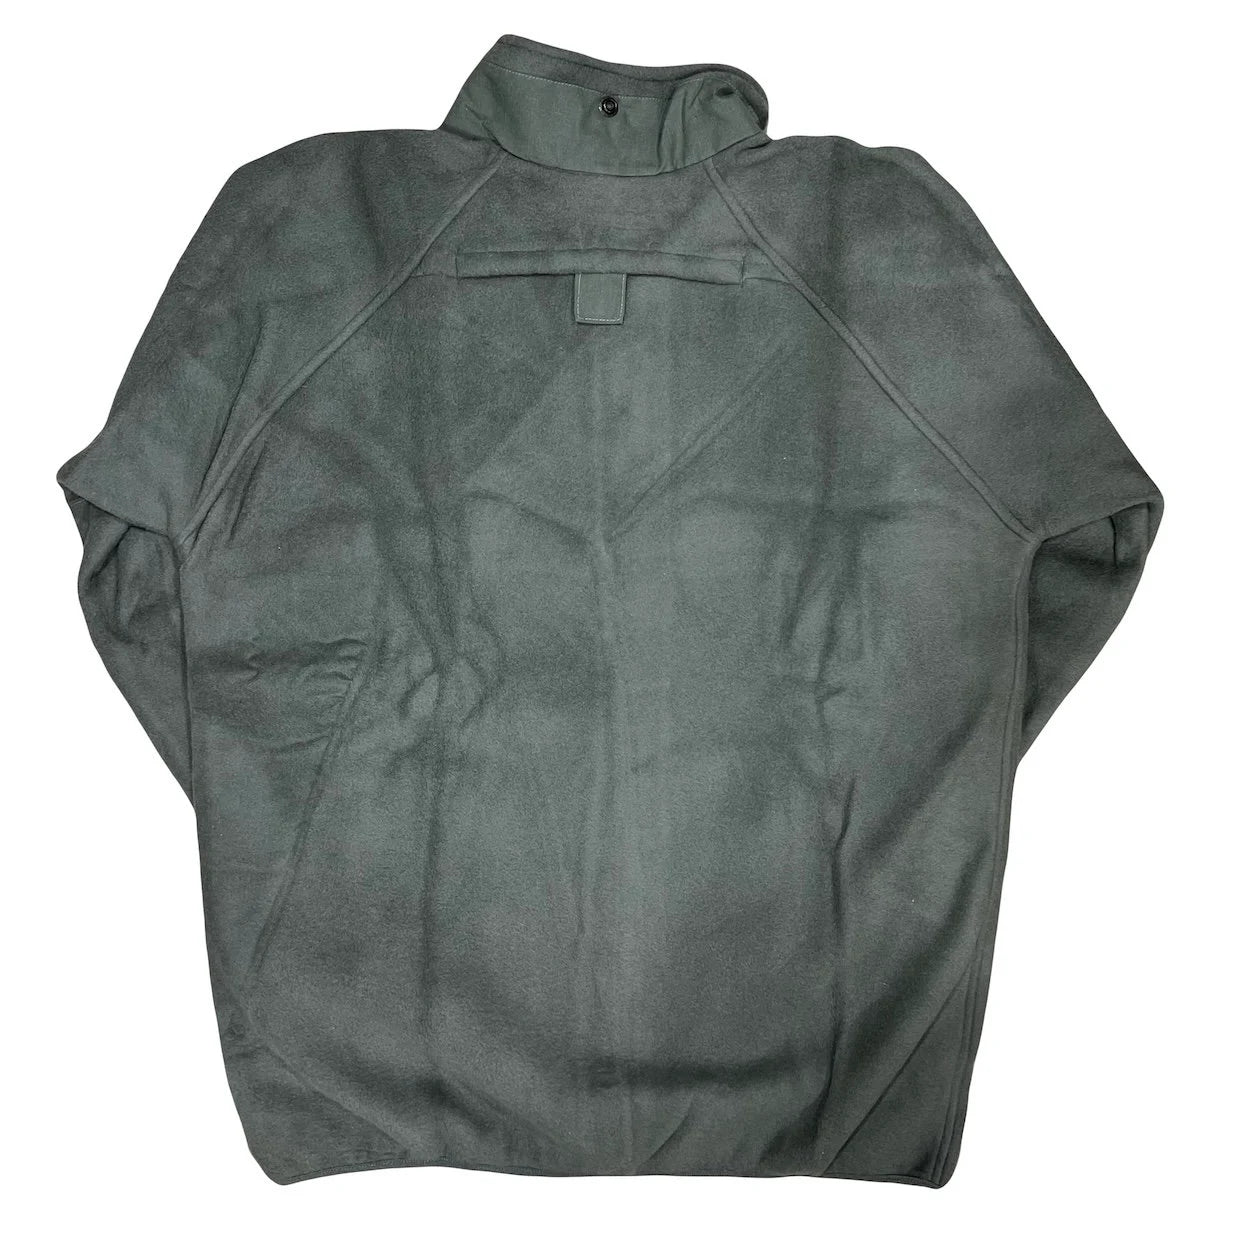 US Military Mid Weight Zipped Flame Resistant Cold Weather Fleece Top By PolarTec Fleece